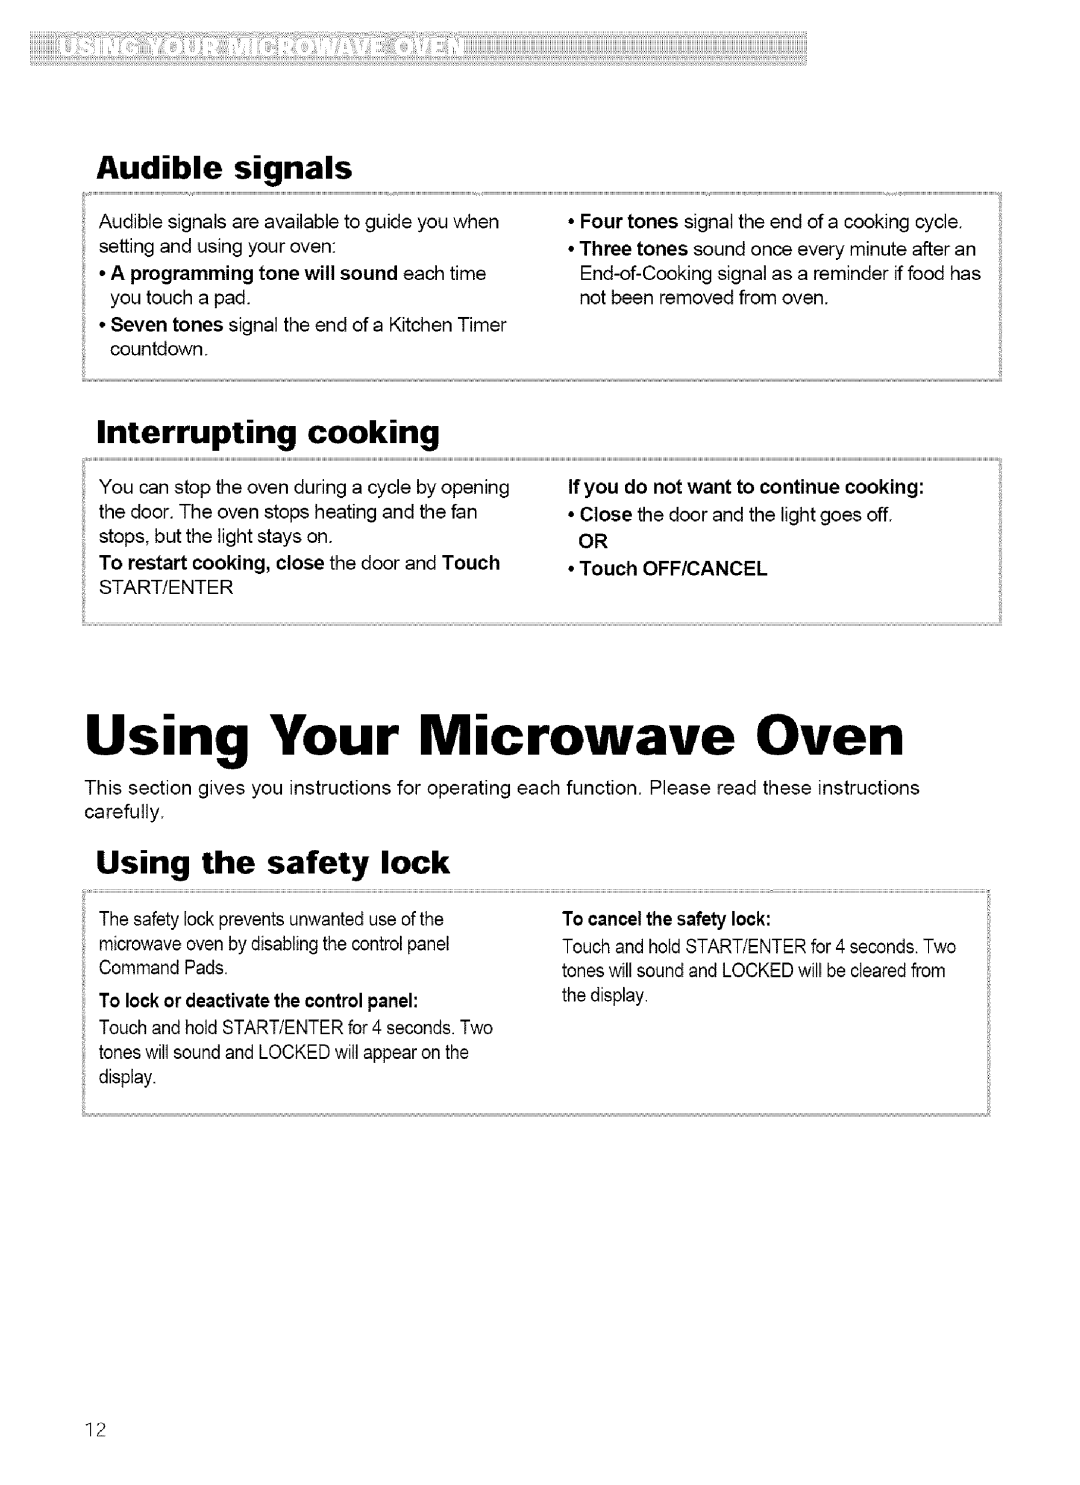 Kenmore 721.62752, 721.62759 manual Using Your Microwave Oven, Audible signals, Interrupting, cooking, Using the safety lock 